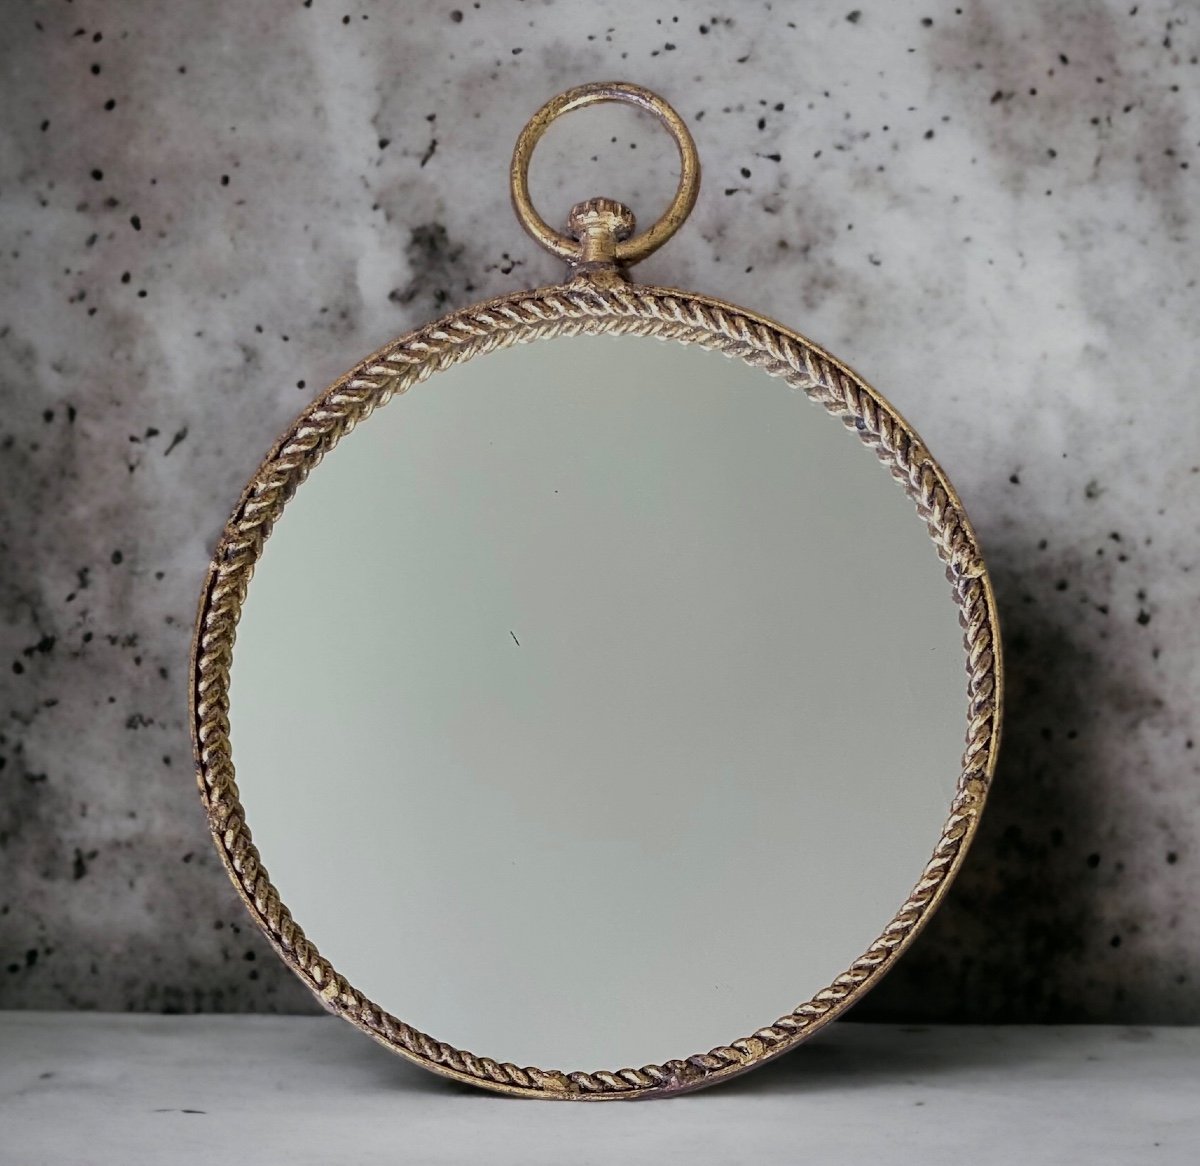 Circular Mirror In Golden And Patinated Metal. Cord Decoration. France 80s.